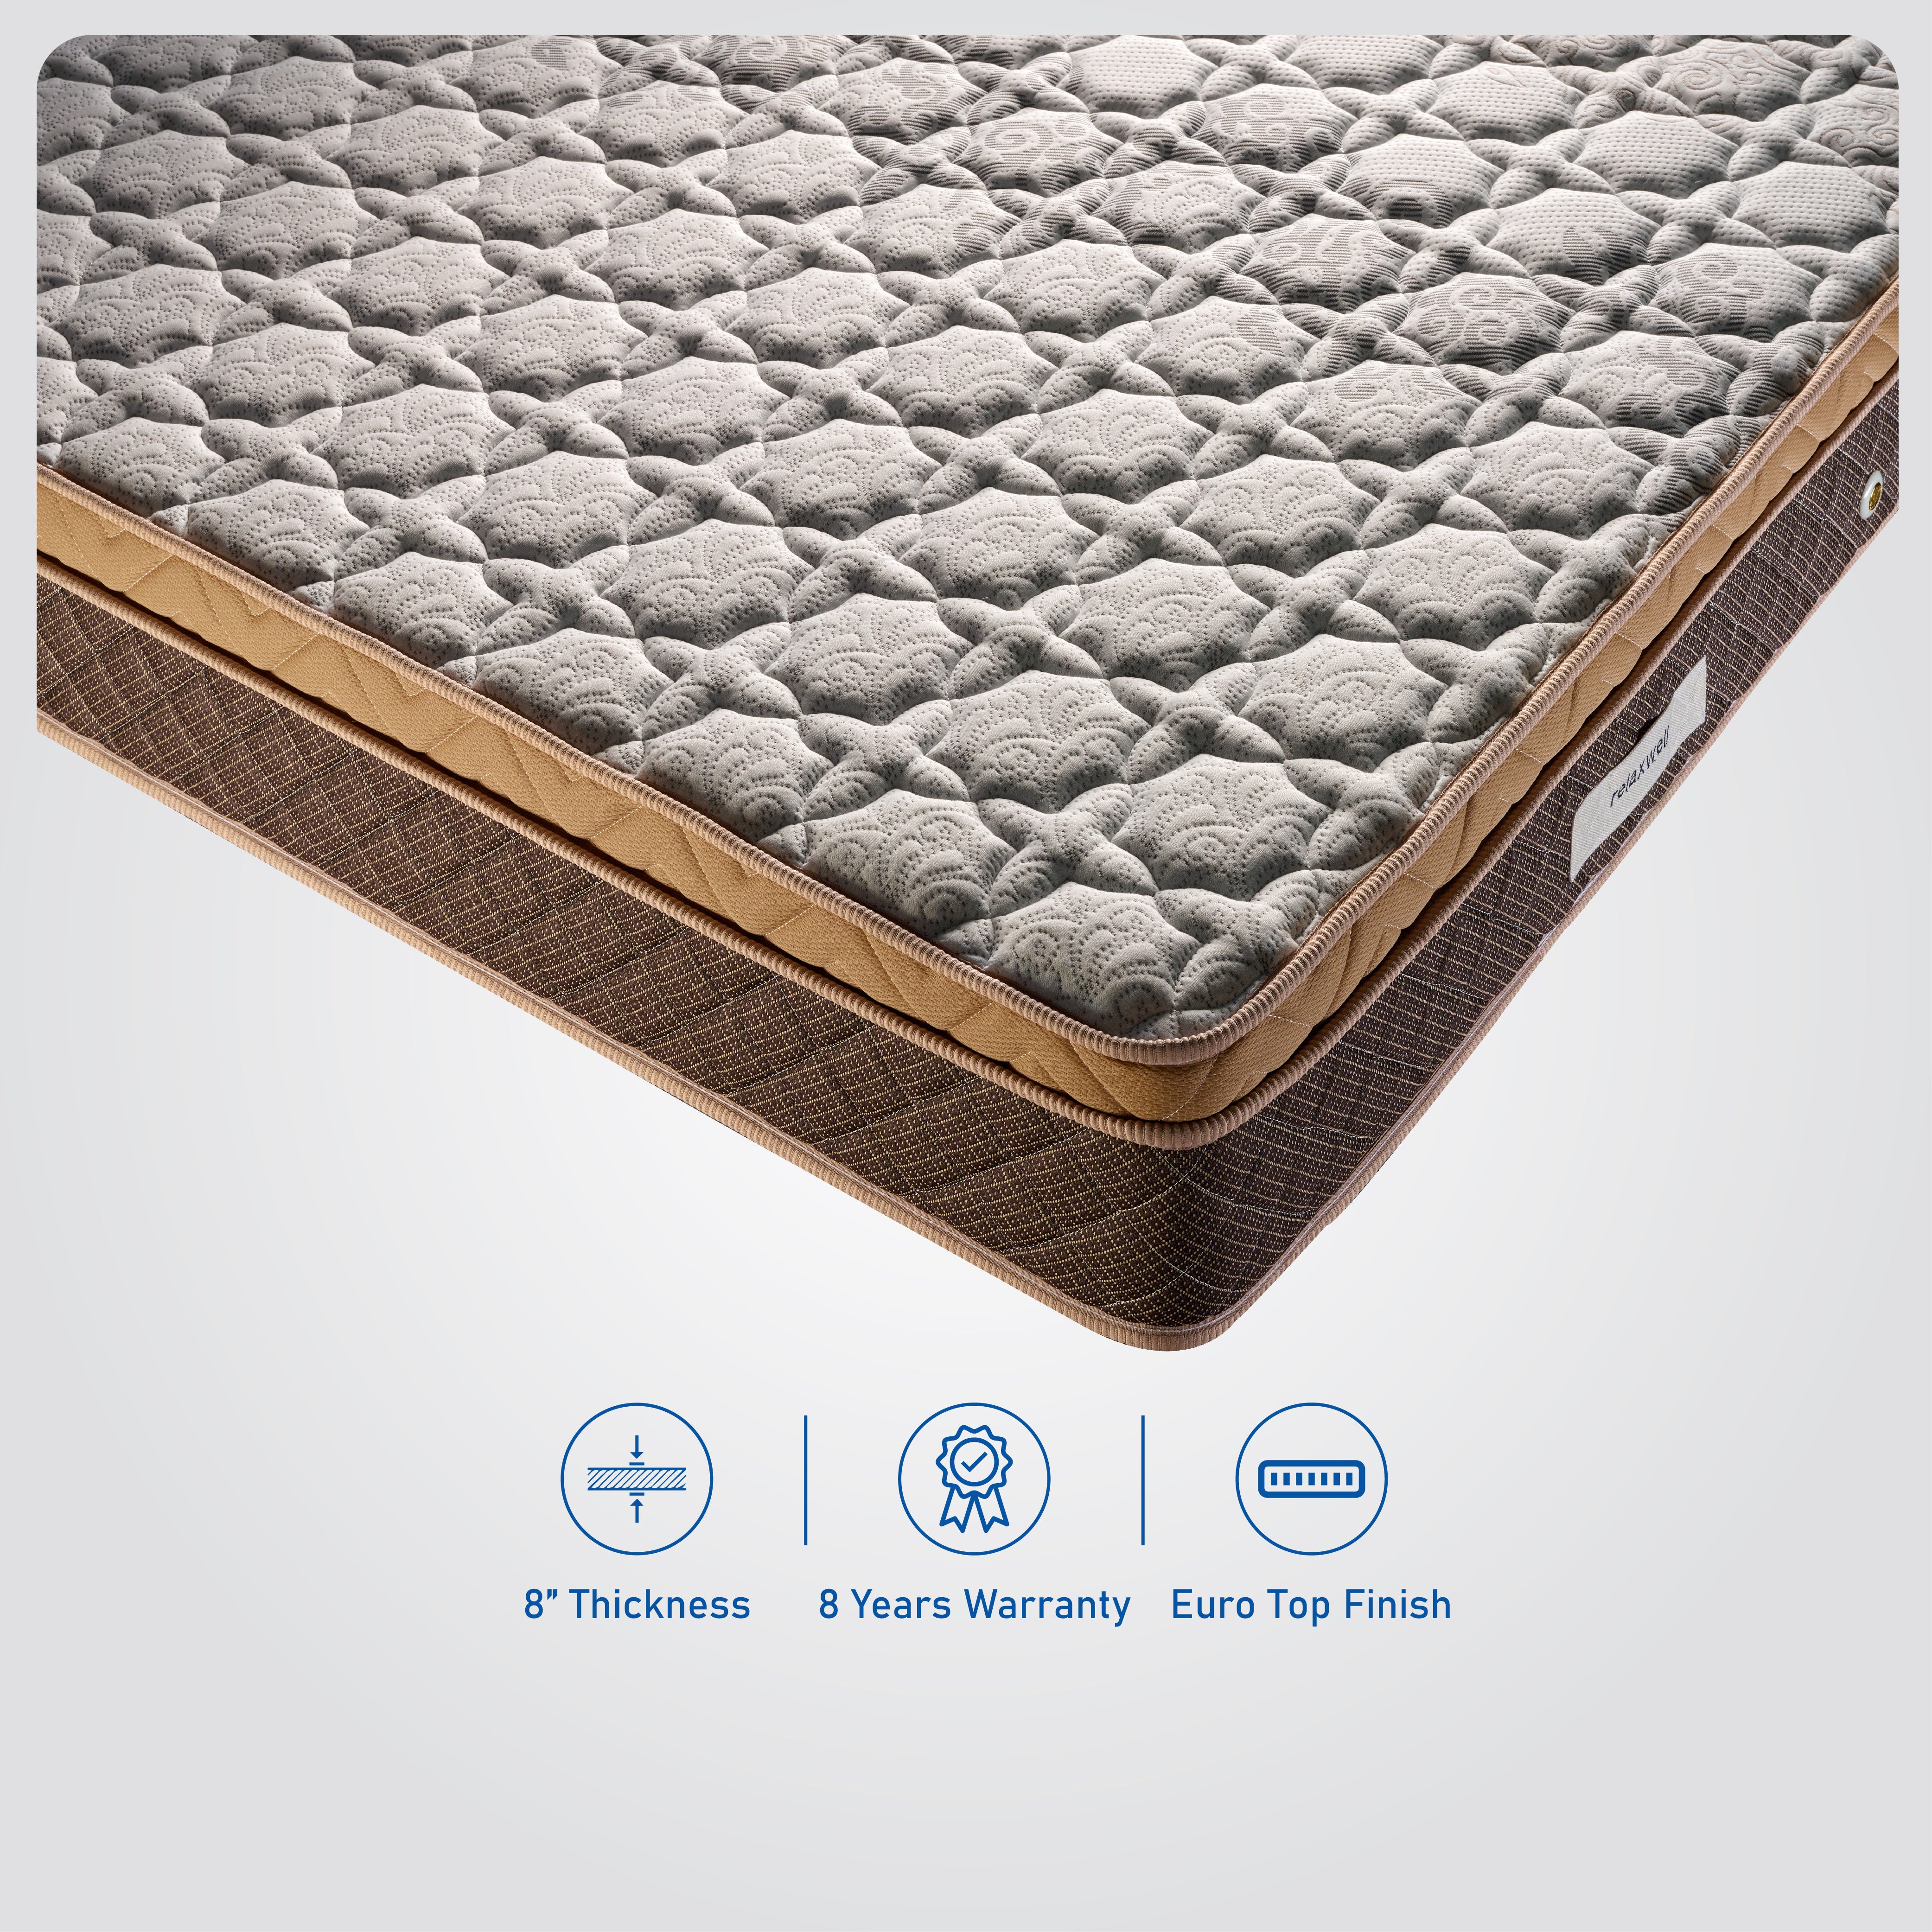 Buy Comfort Pocketed Spring Mattress with Euro Top Finish In India